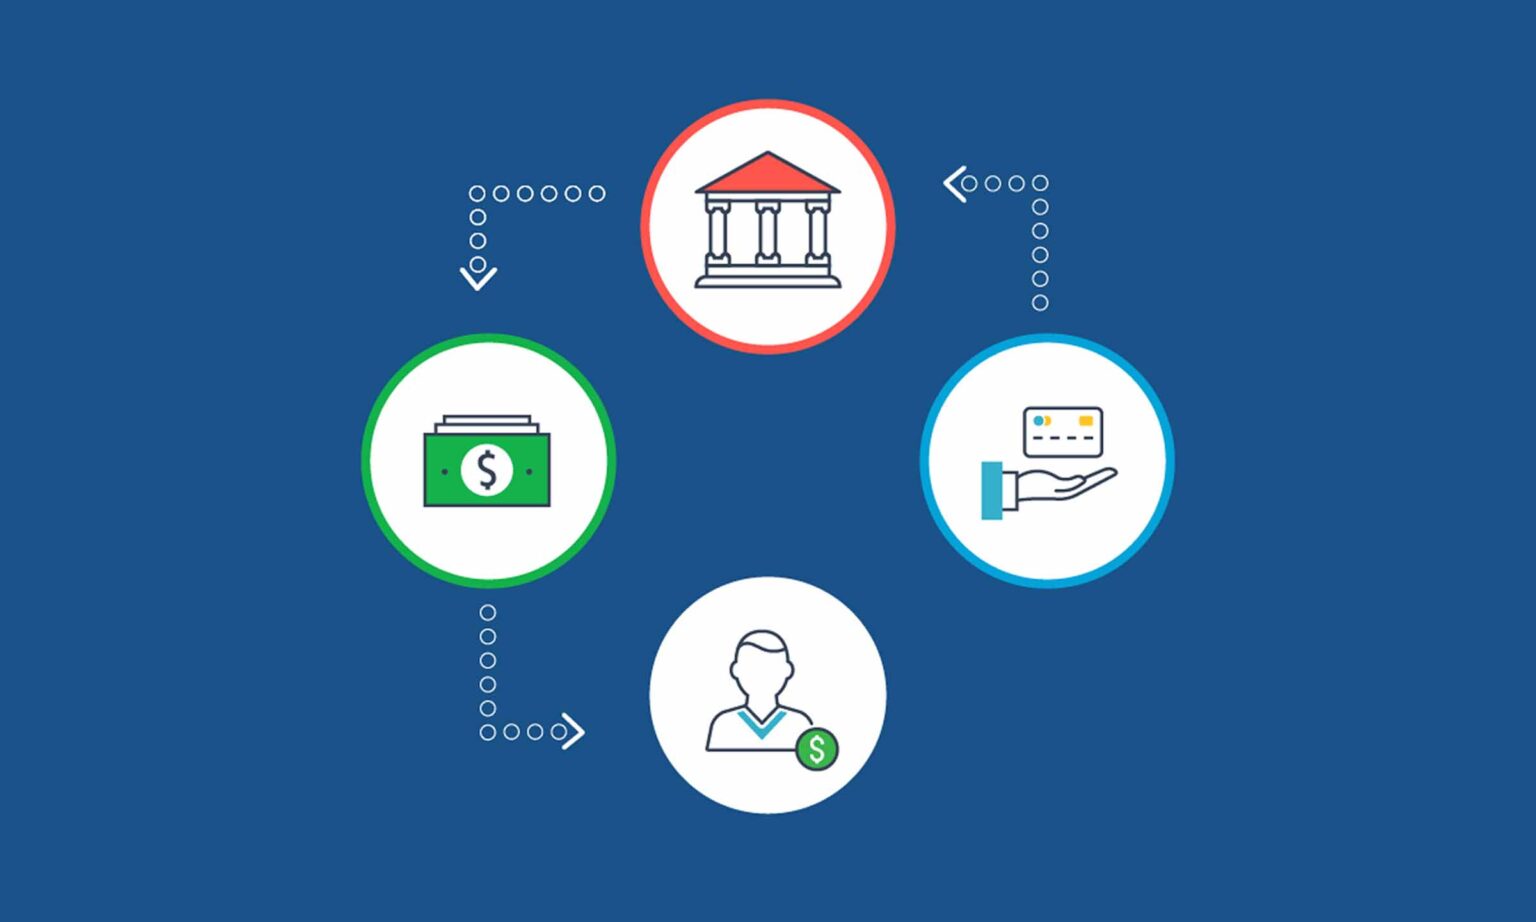 Are you in the market for a payment gateway system but overwhelmed by the options? Dive into the details of how to evaluate the right system for you!